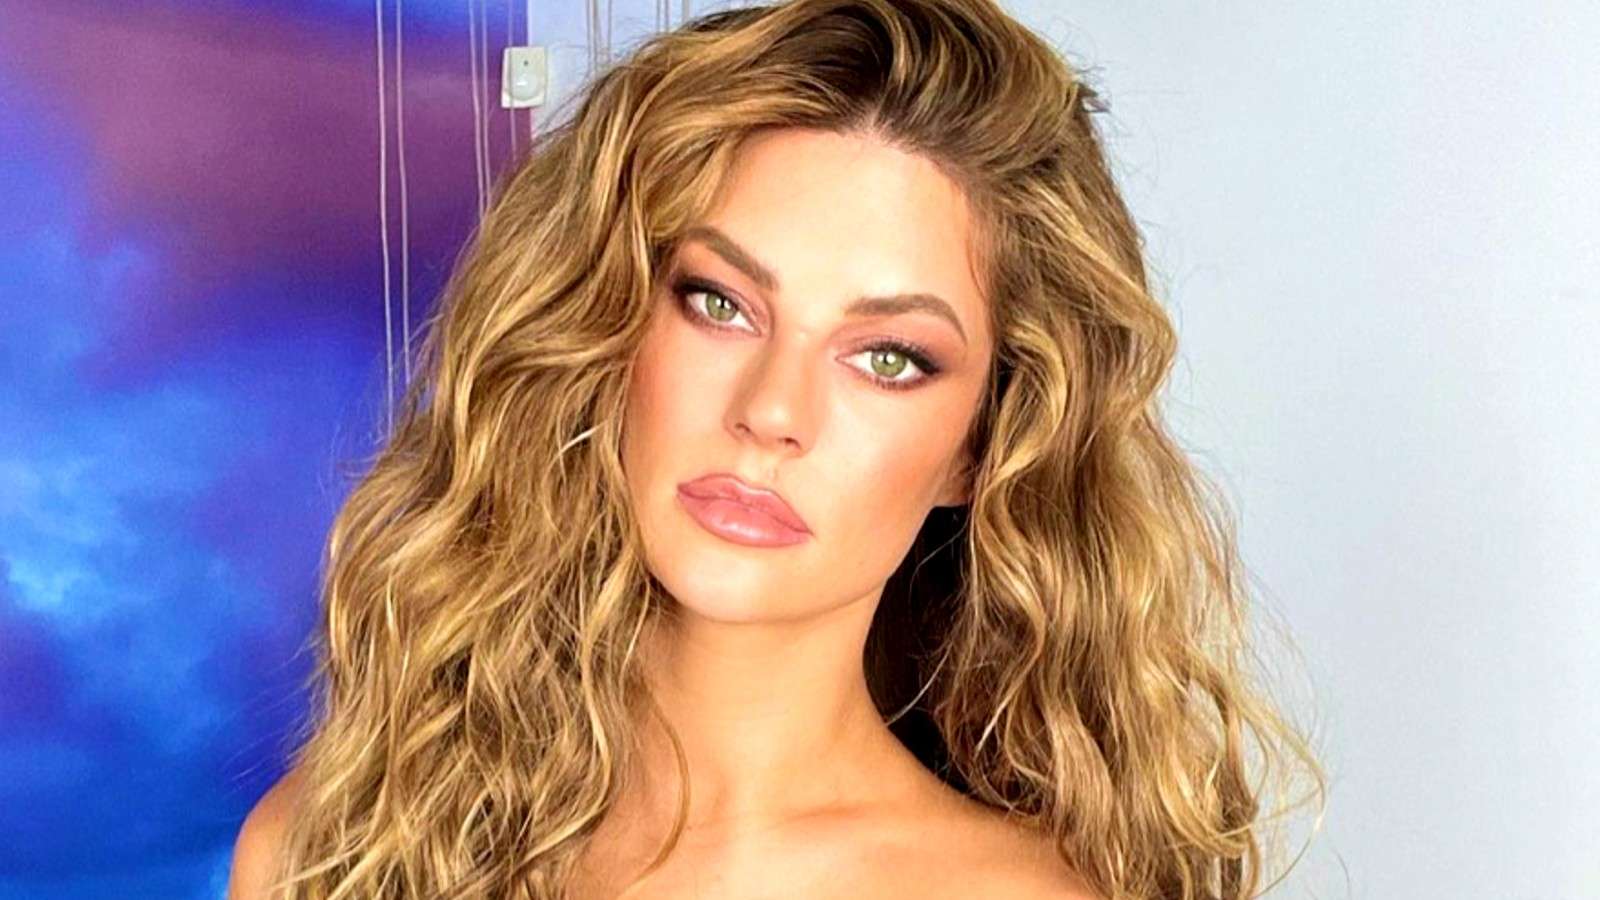 Hannah Stocking poses in an Instagram photo